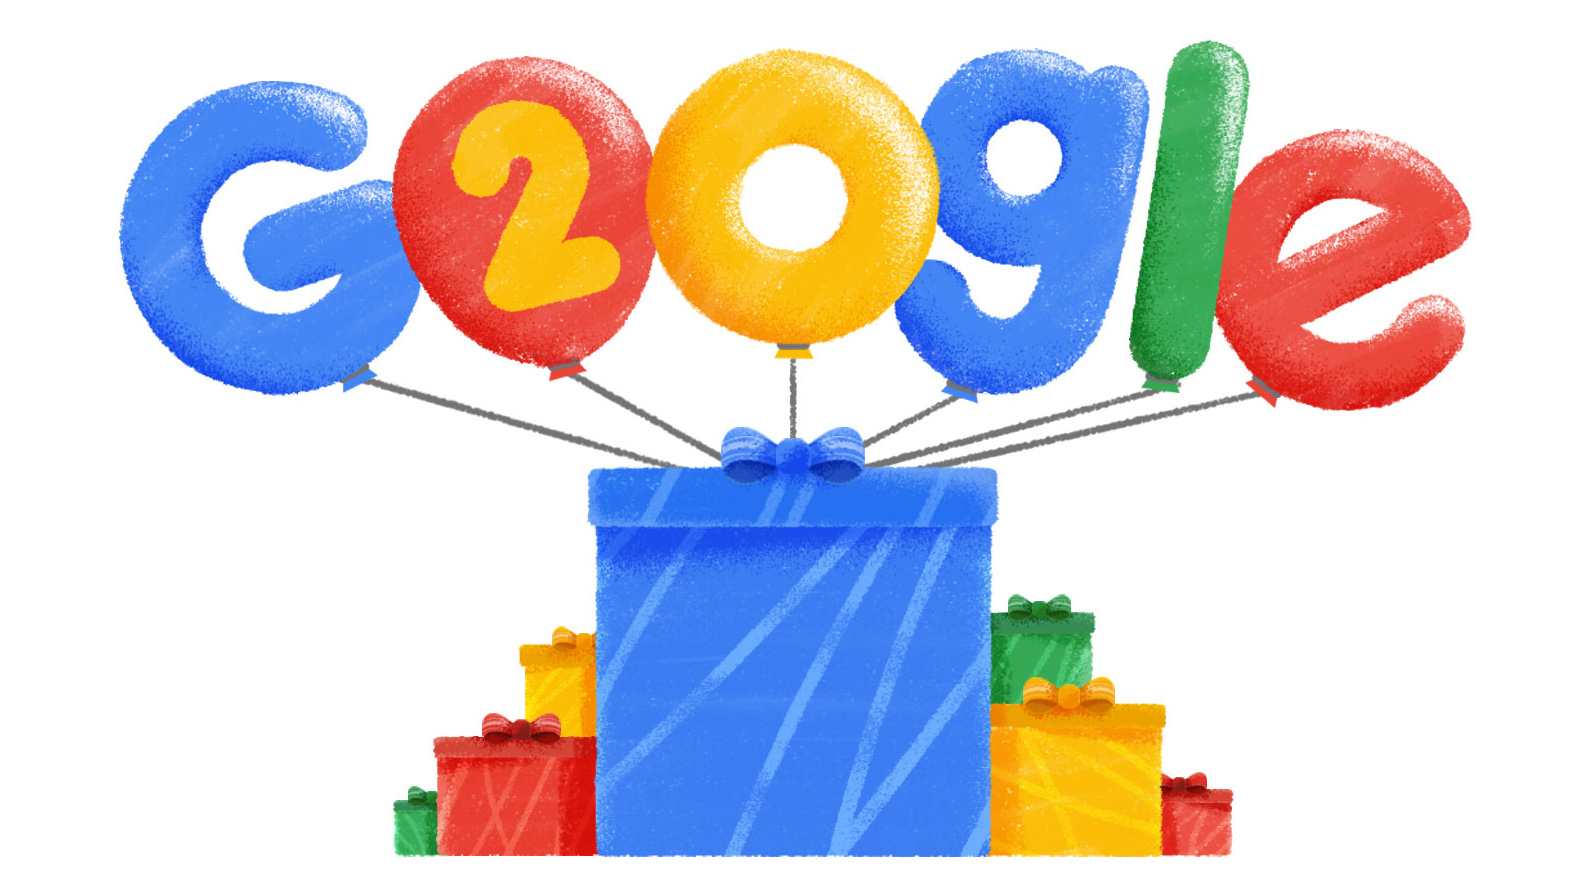 Here are all of the Easter eggs for Google's 20th anniversary and the